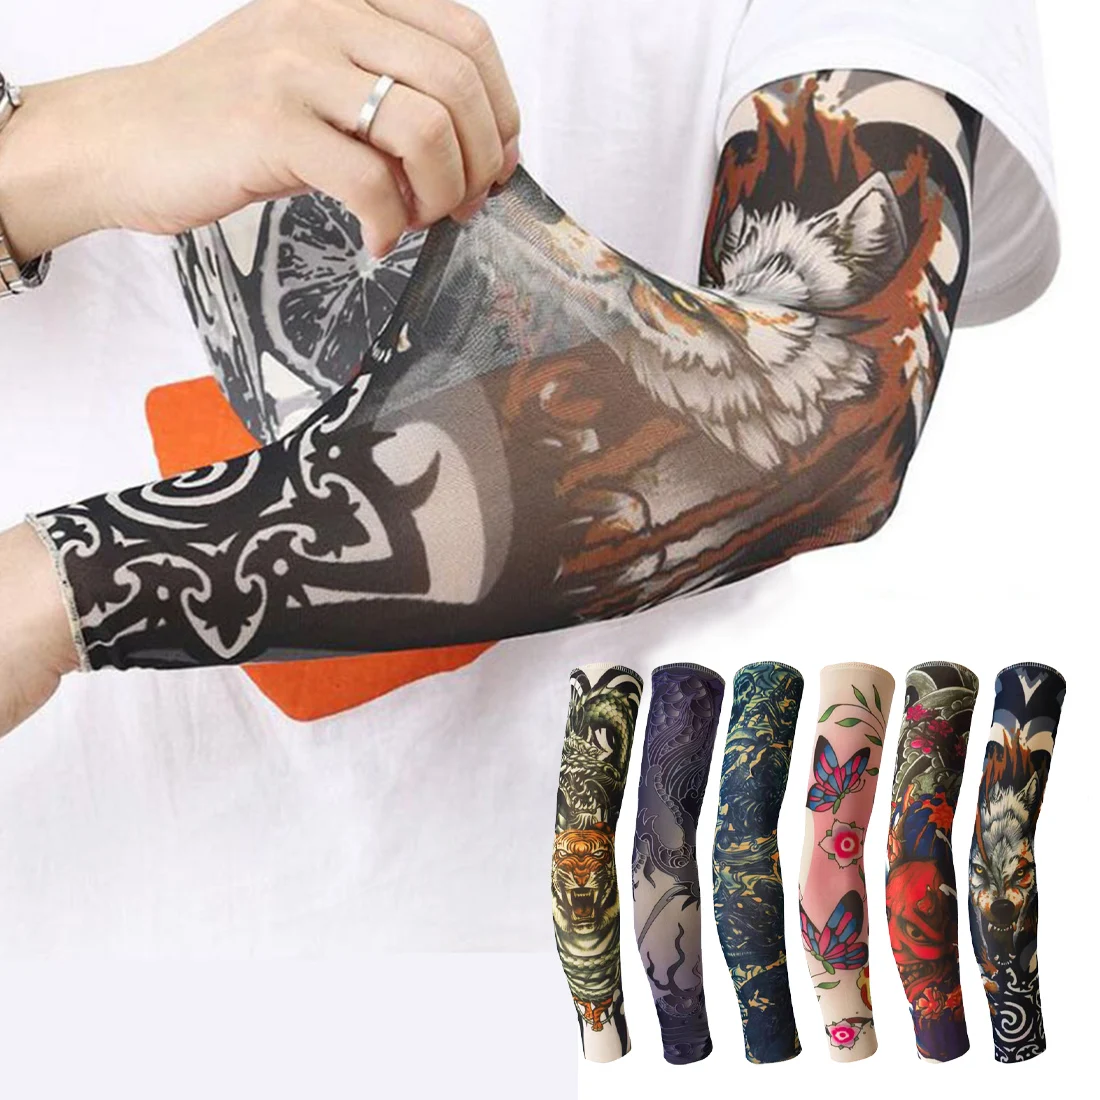 

6Pcs Street Tattoo Arm Sleeves Sun UV Protection Arm Cover Seamless Outdoor Riding Sunscreen Arm Sleeves Glover For Men Women